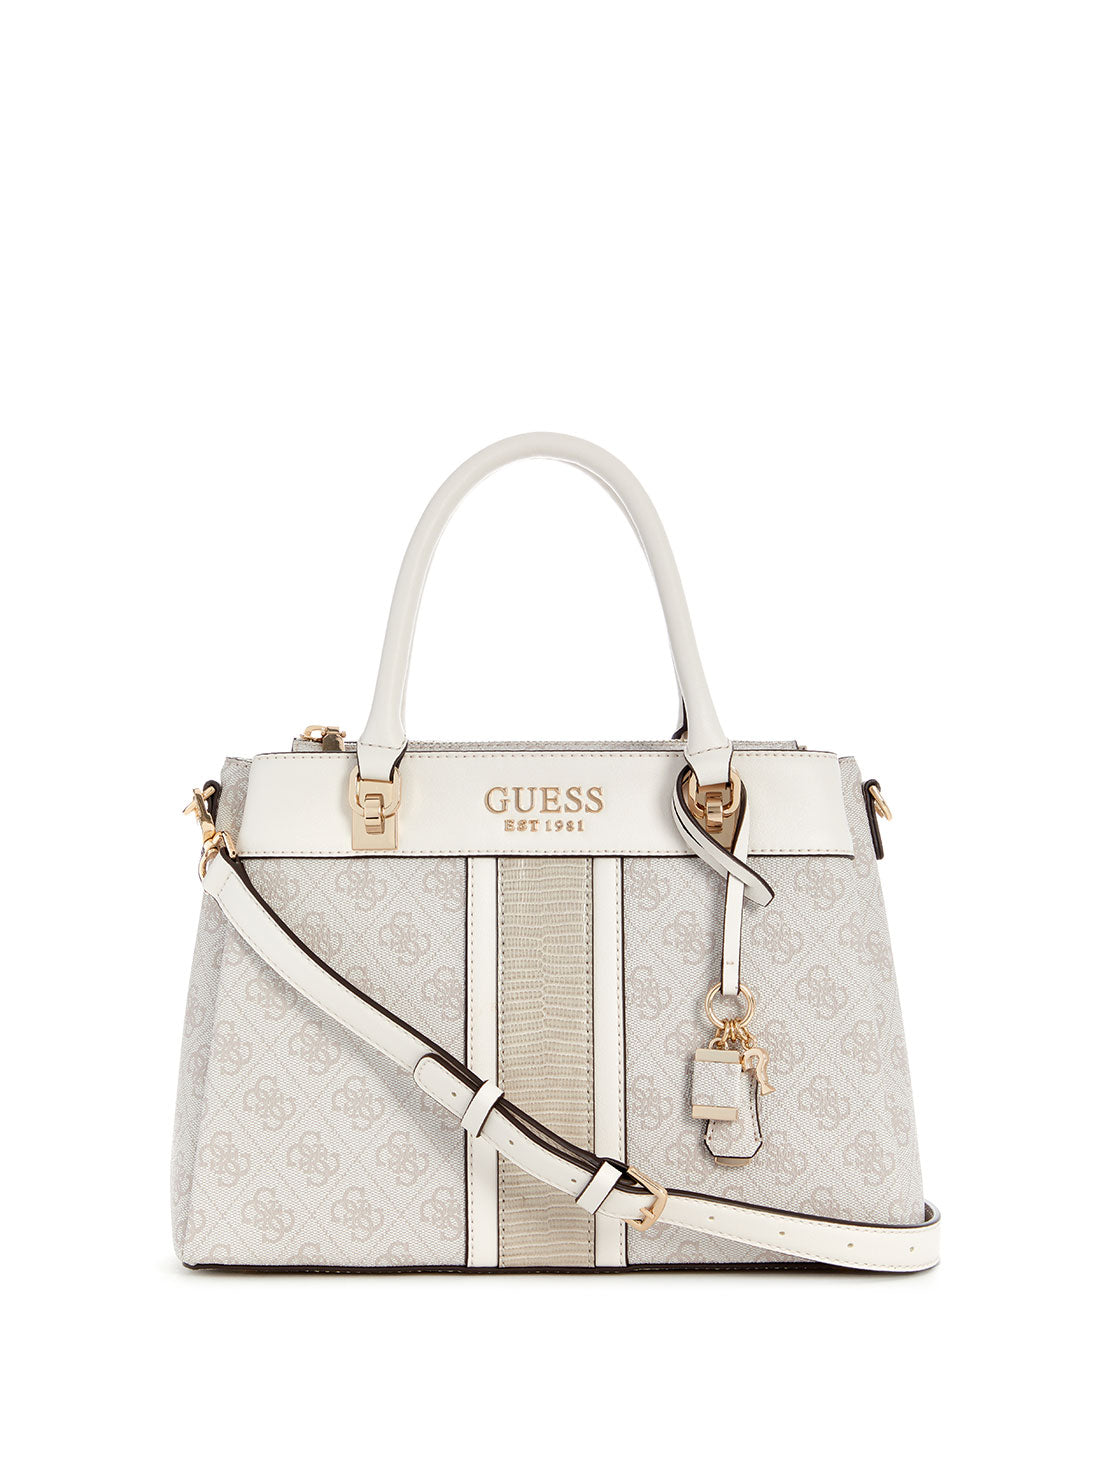 GUESS White Logo Cristiana Satchel Bag front view